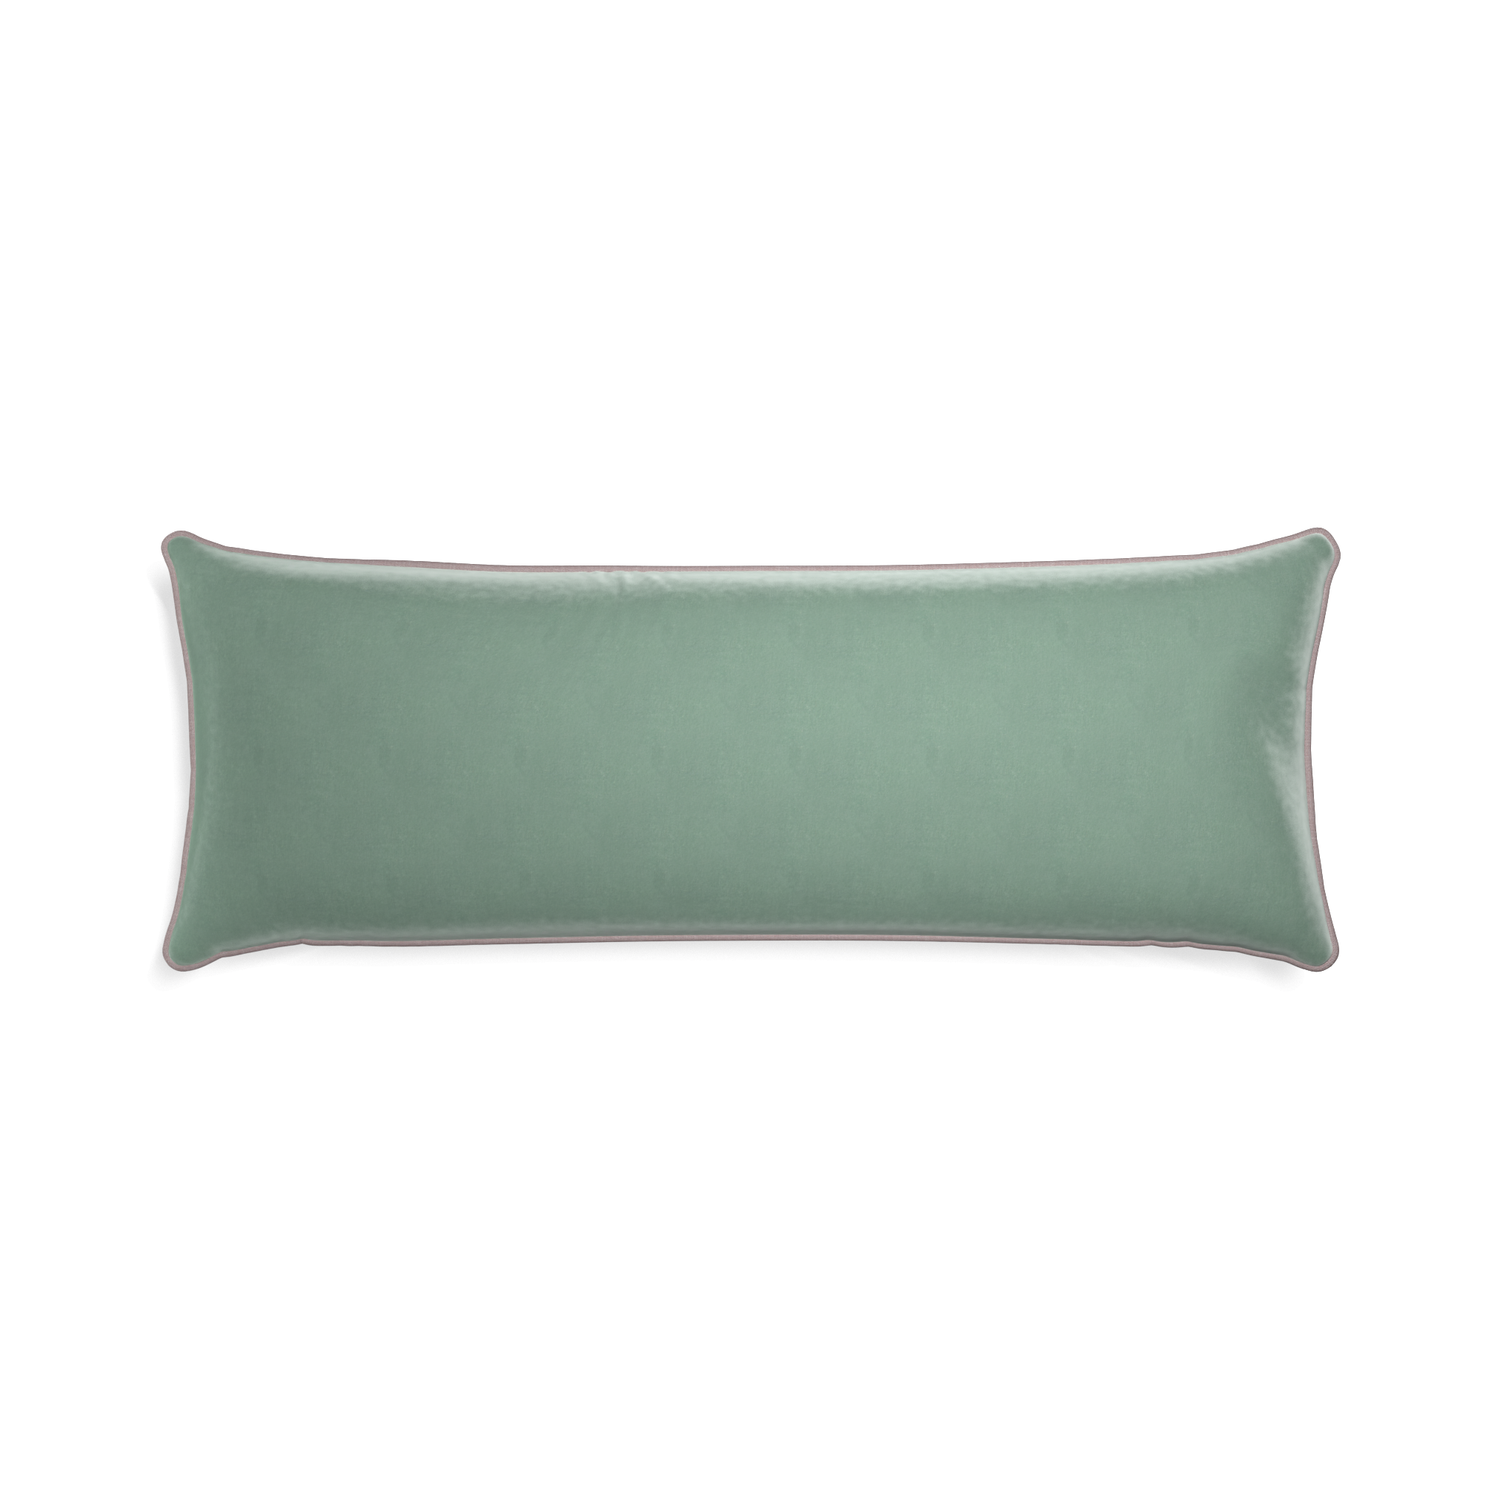 Xl-lumbar sea salt velvet custom blue greenpillow with orchid piping on white background